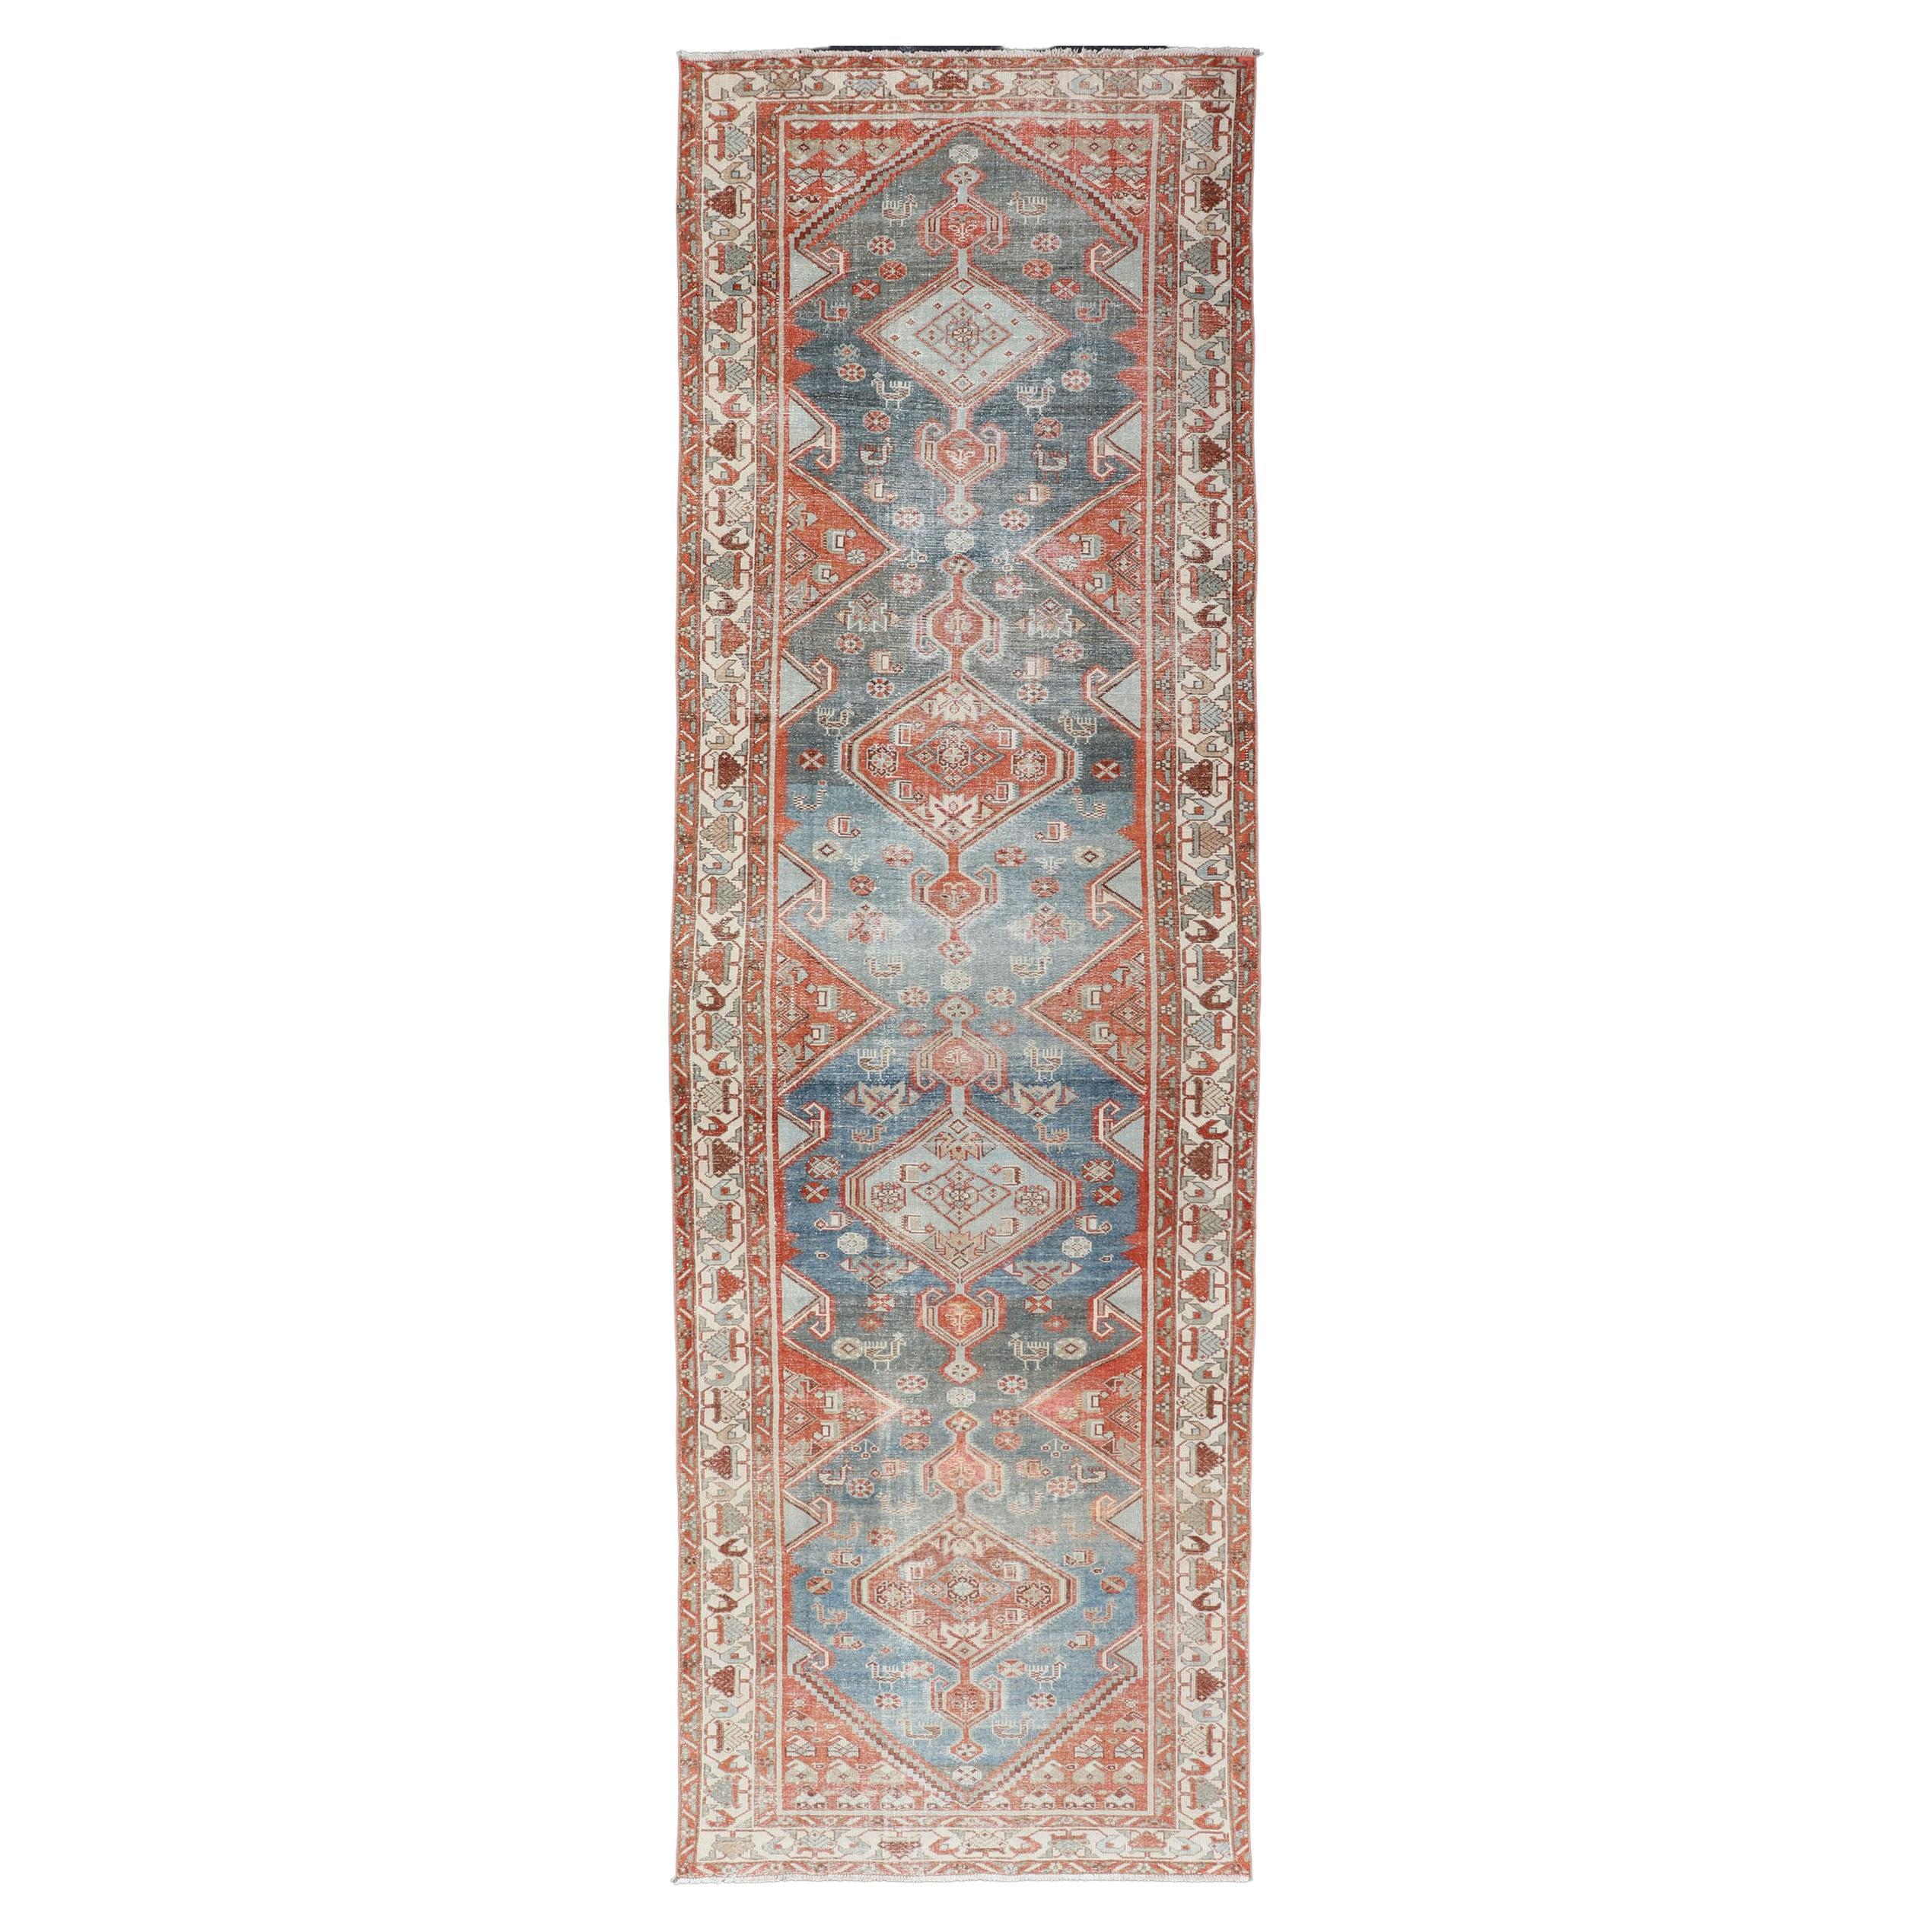 Antique Persian Malayer Runner with Geometric Medallion Design